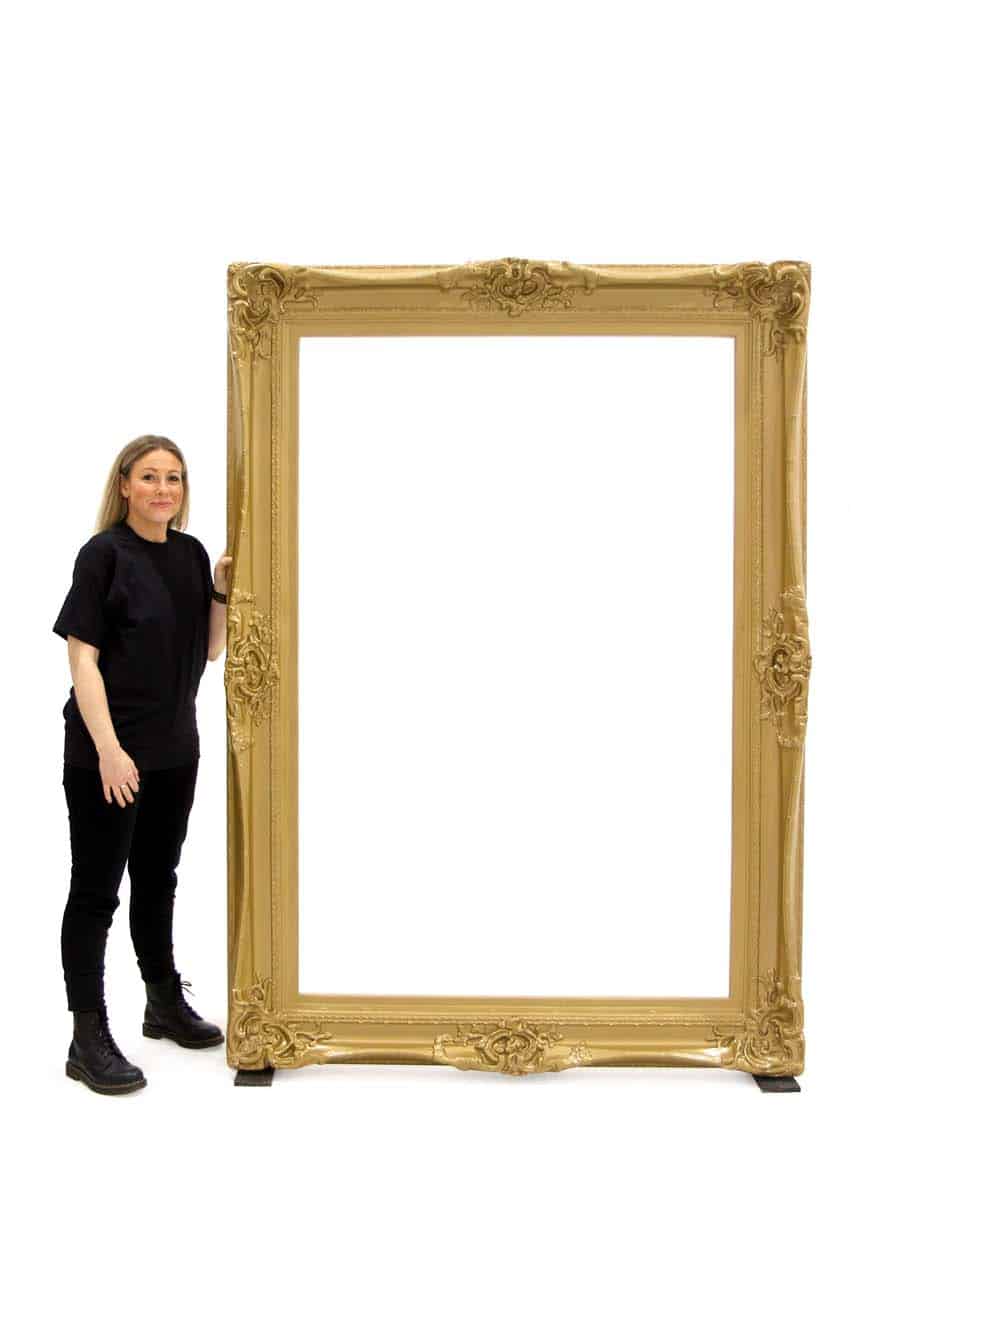 Giant Gold Frame #2  EPH Creative - Event Prop Hire